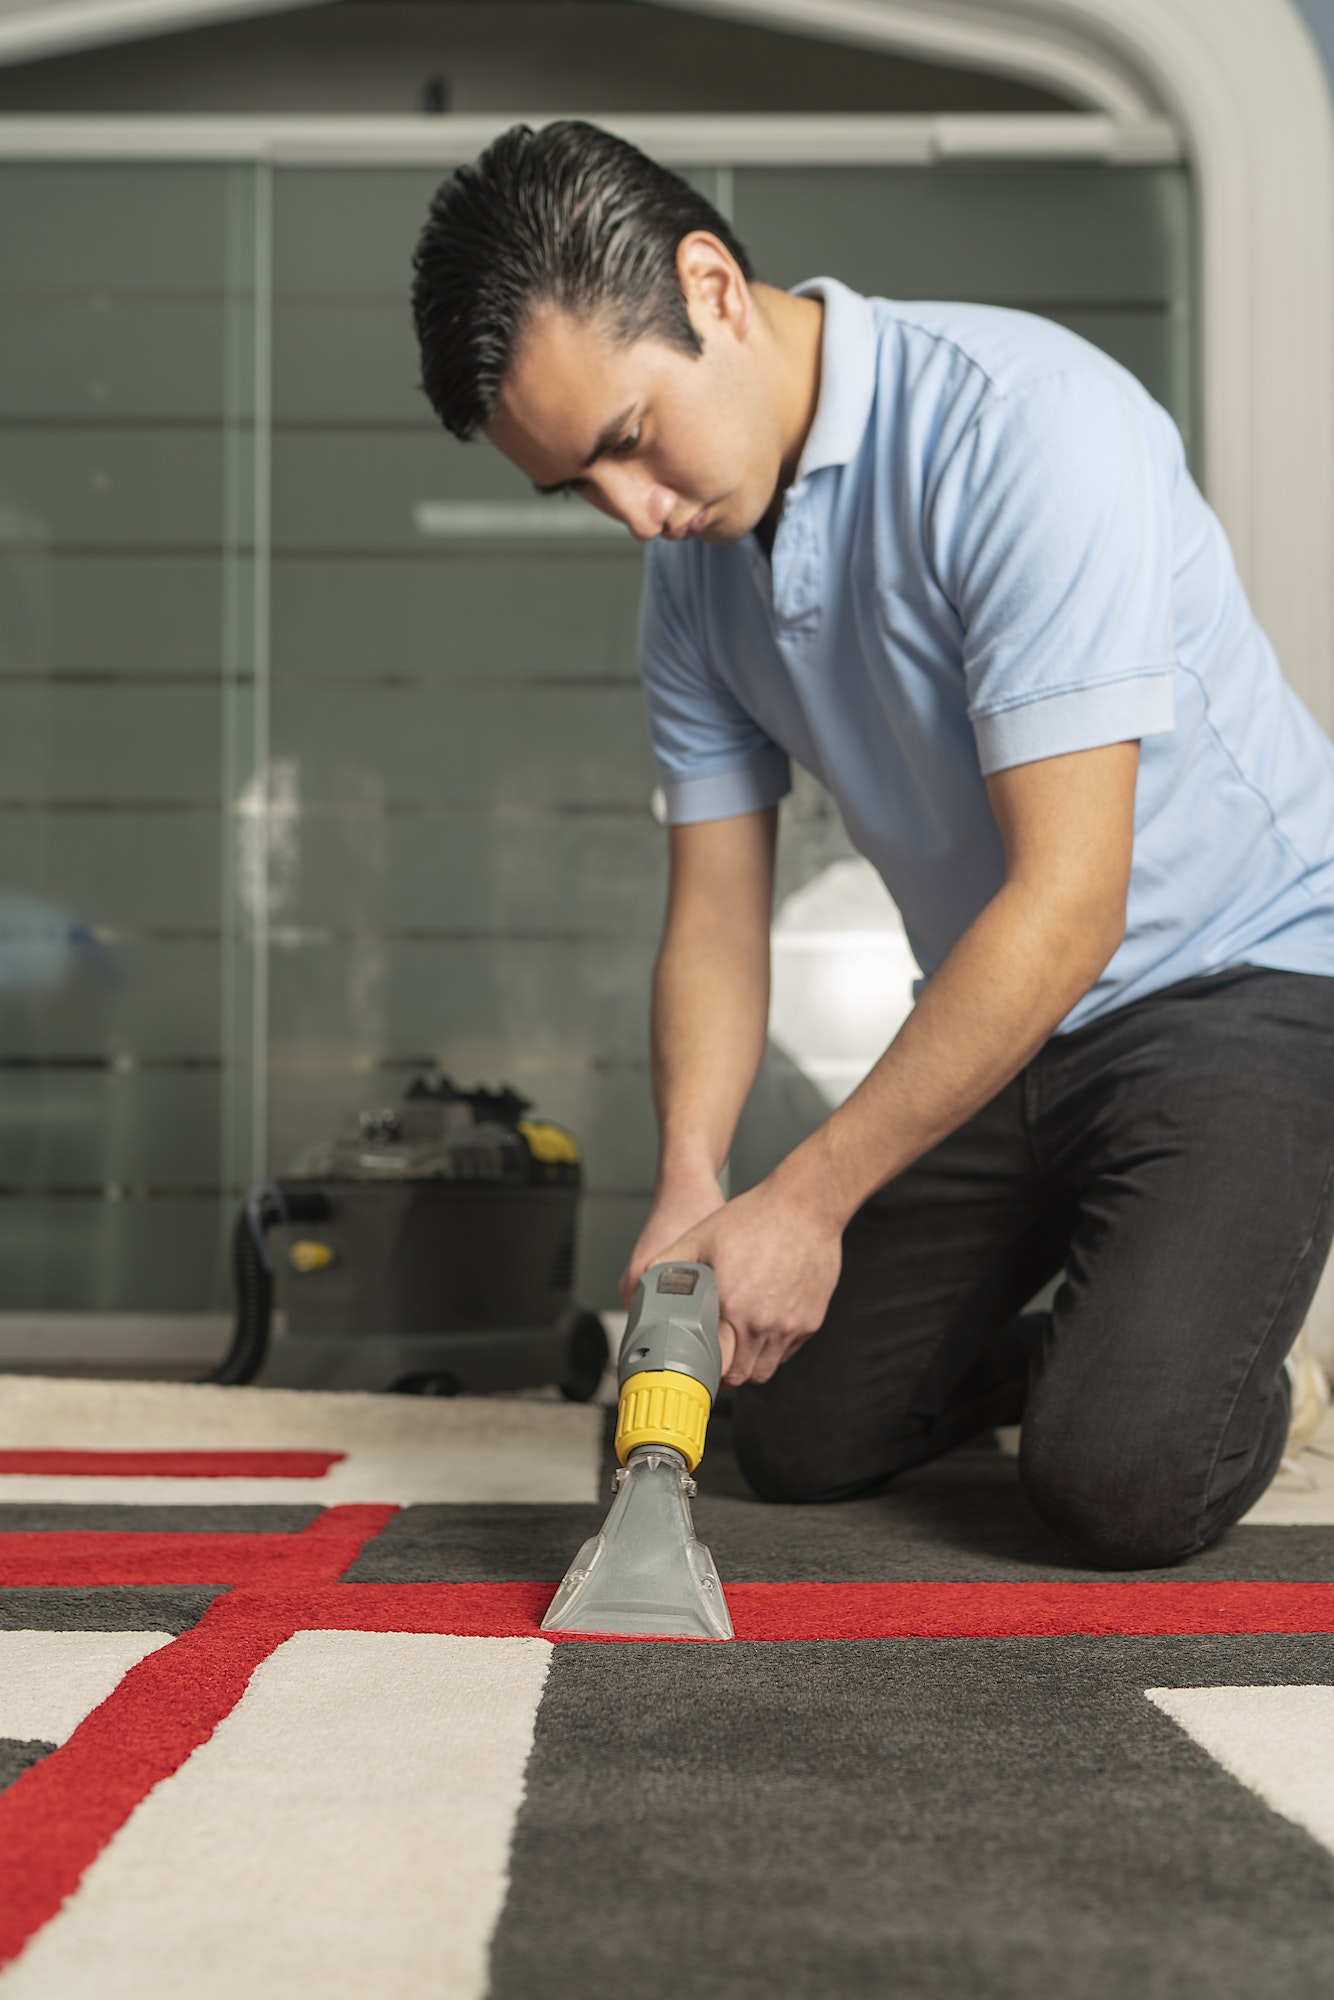 Laundry personnel cleaning carpet with special equipment